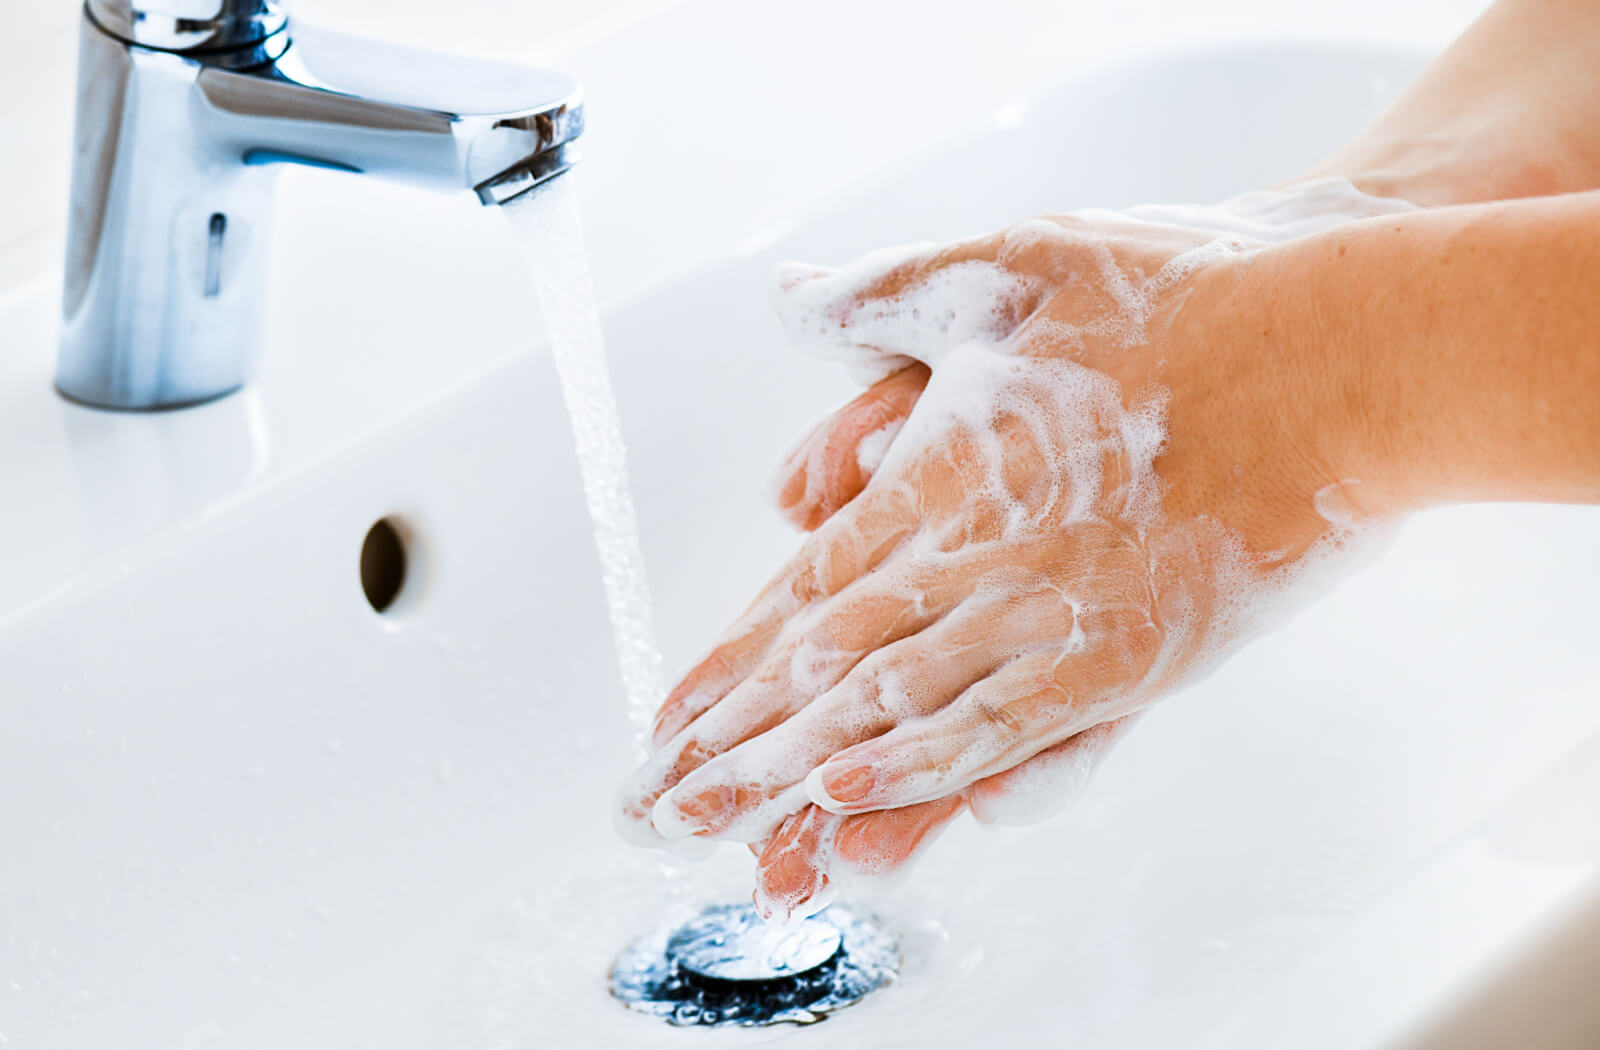 A close-up of a woman's hand being washed using water and soap.